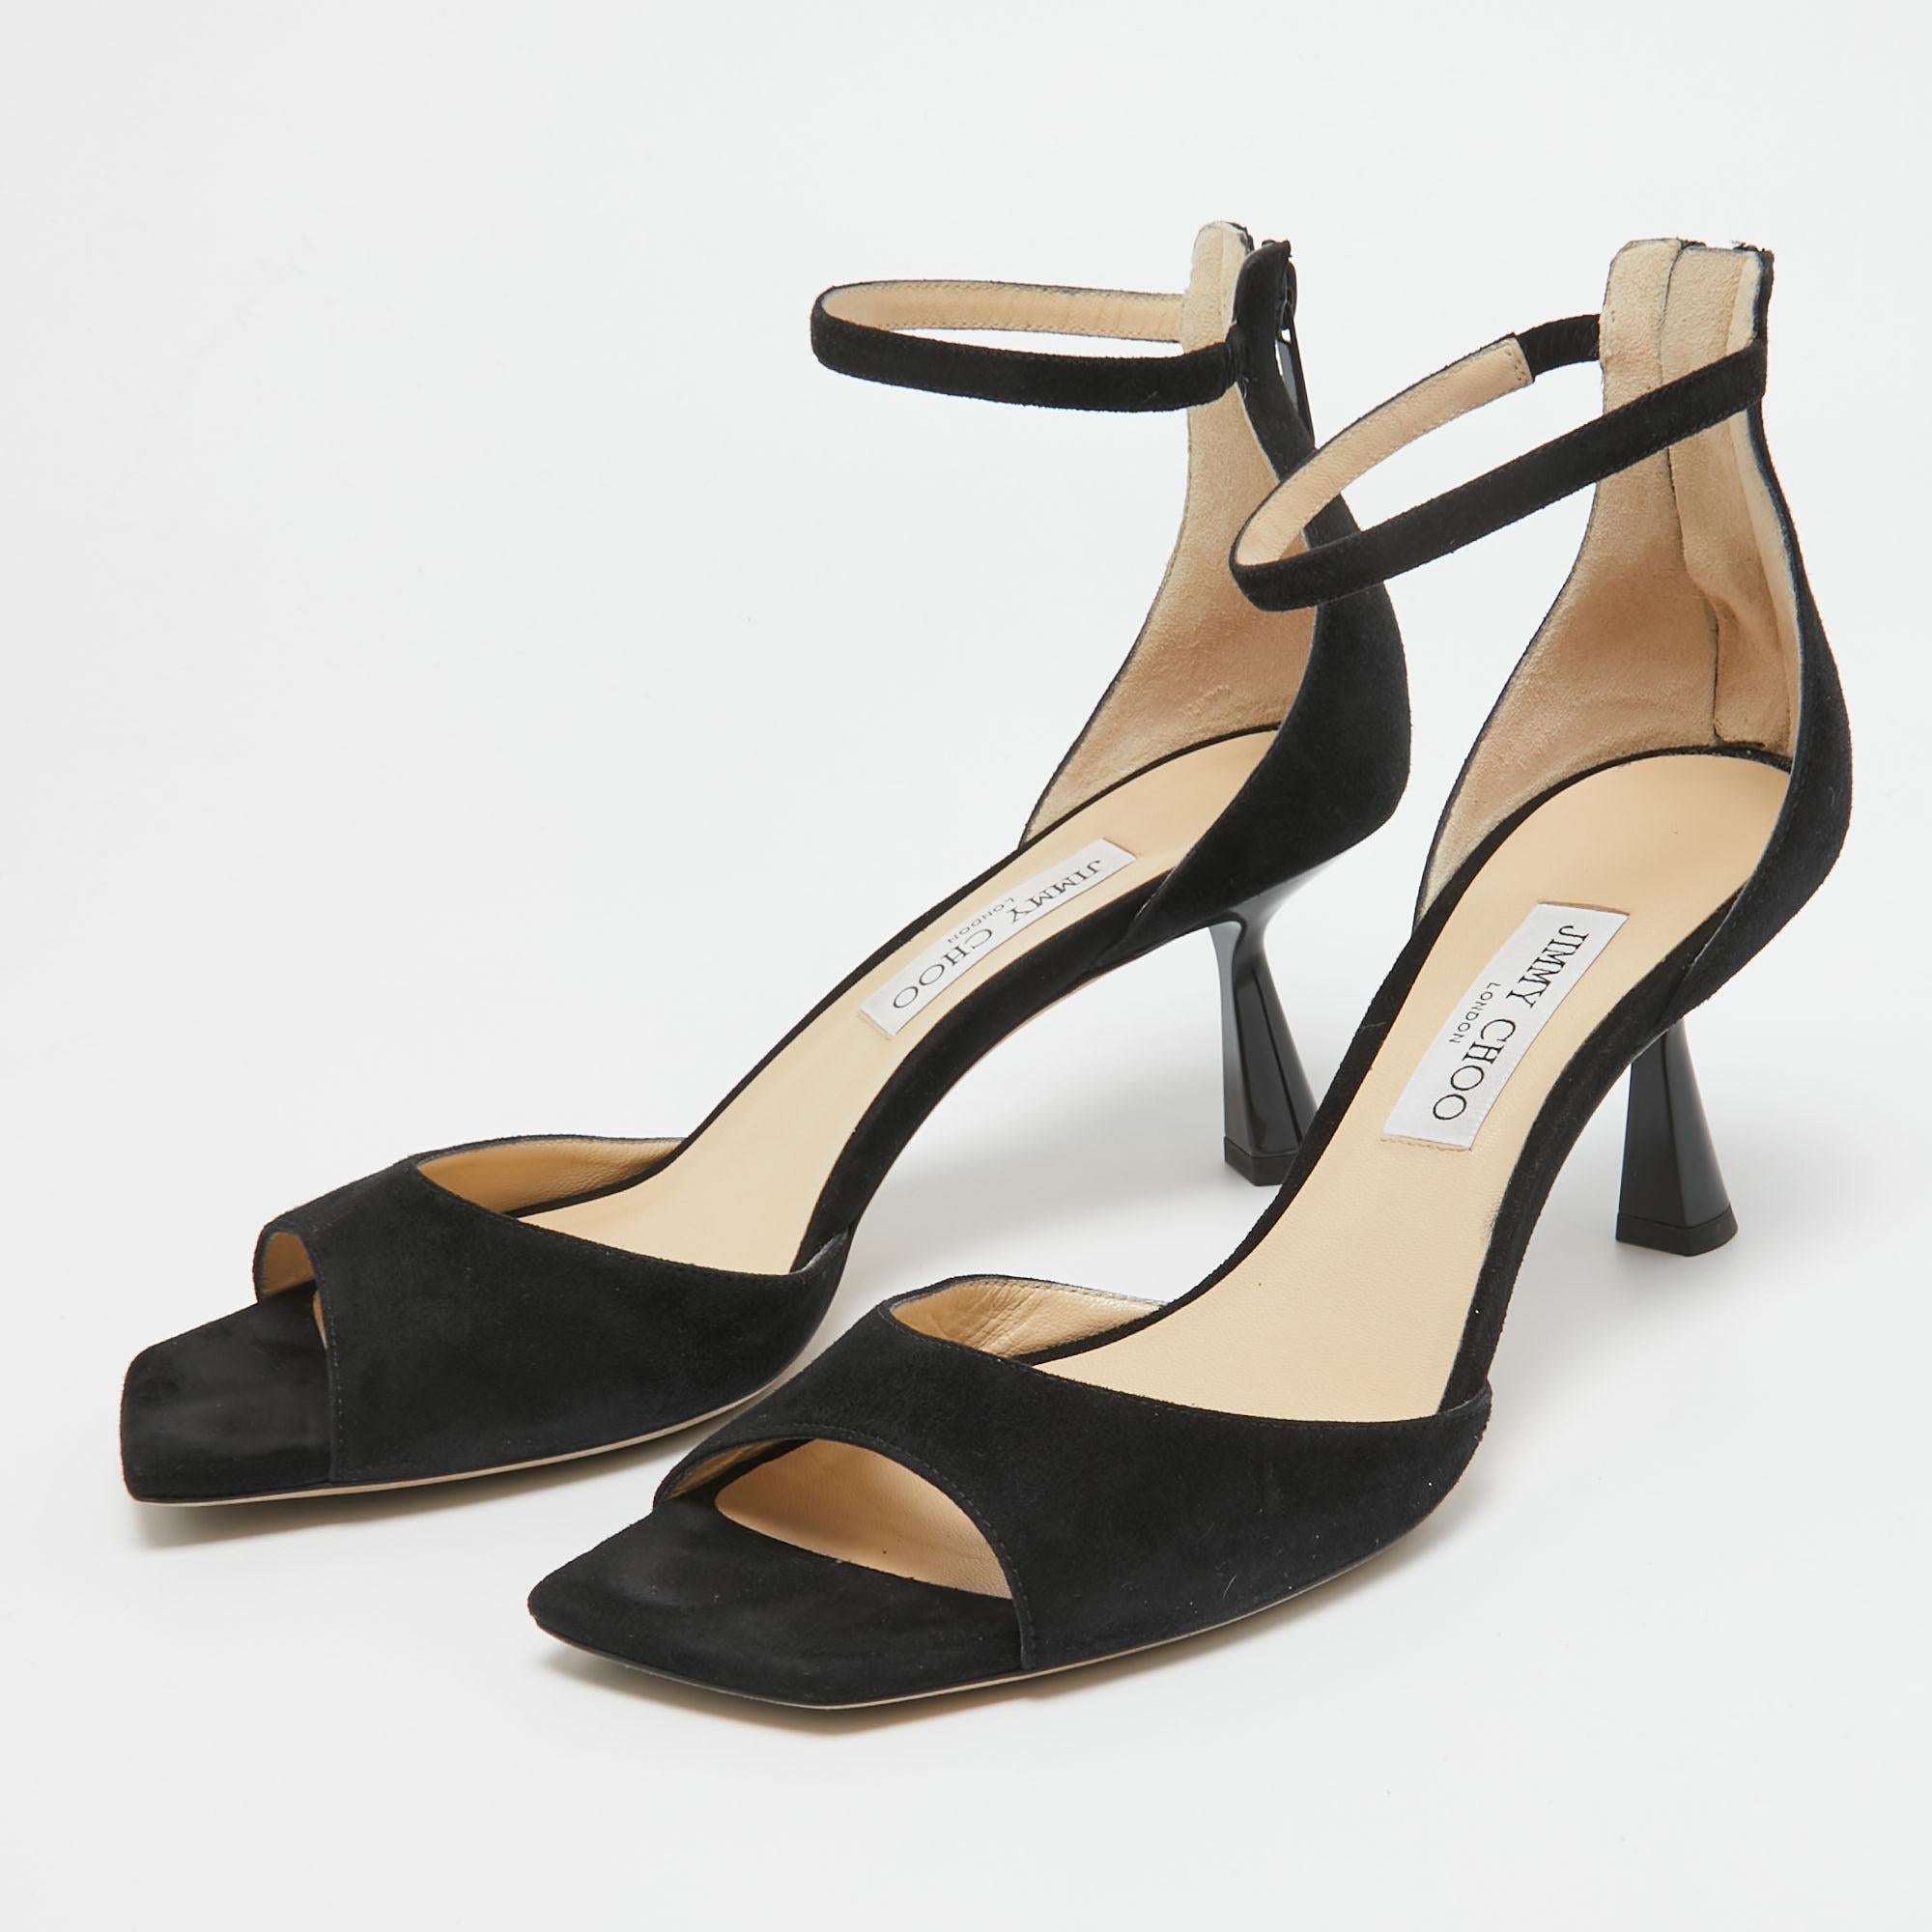 Jimmy Choo Black Suede Reon Sandals Size 41 4